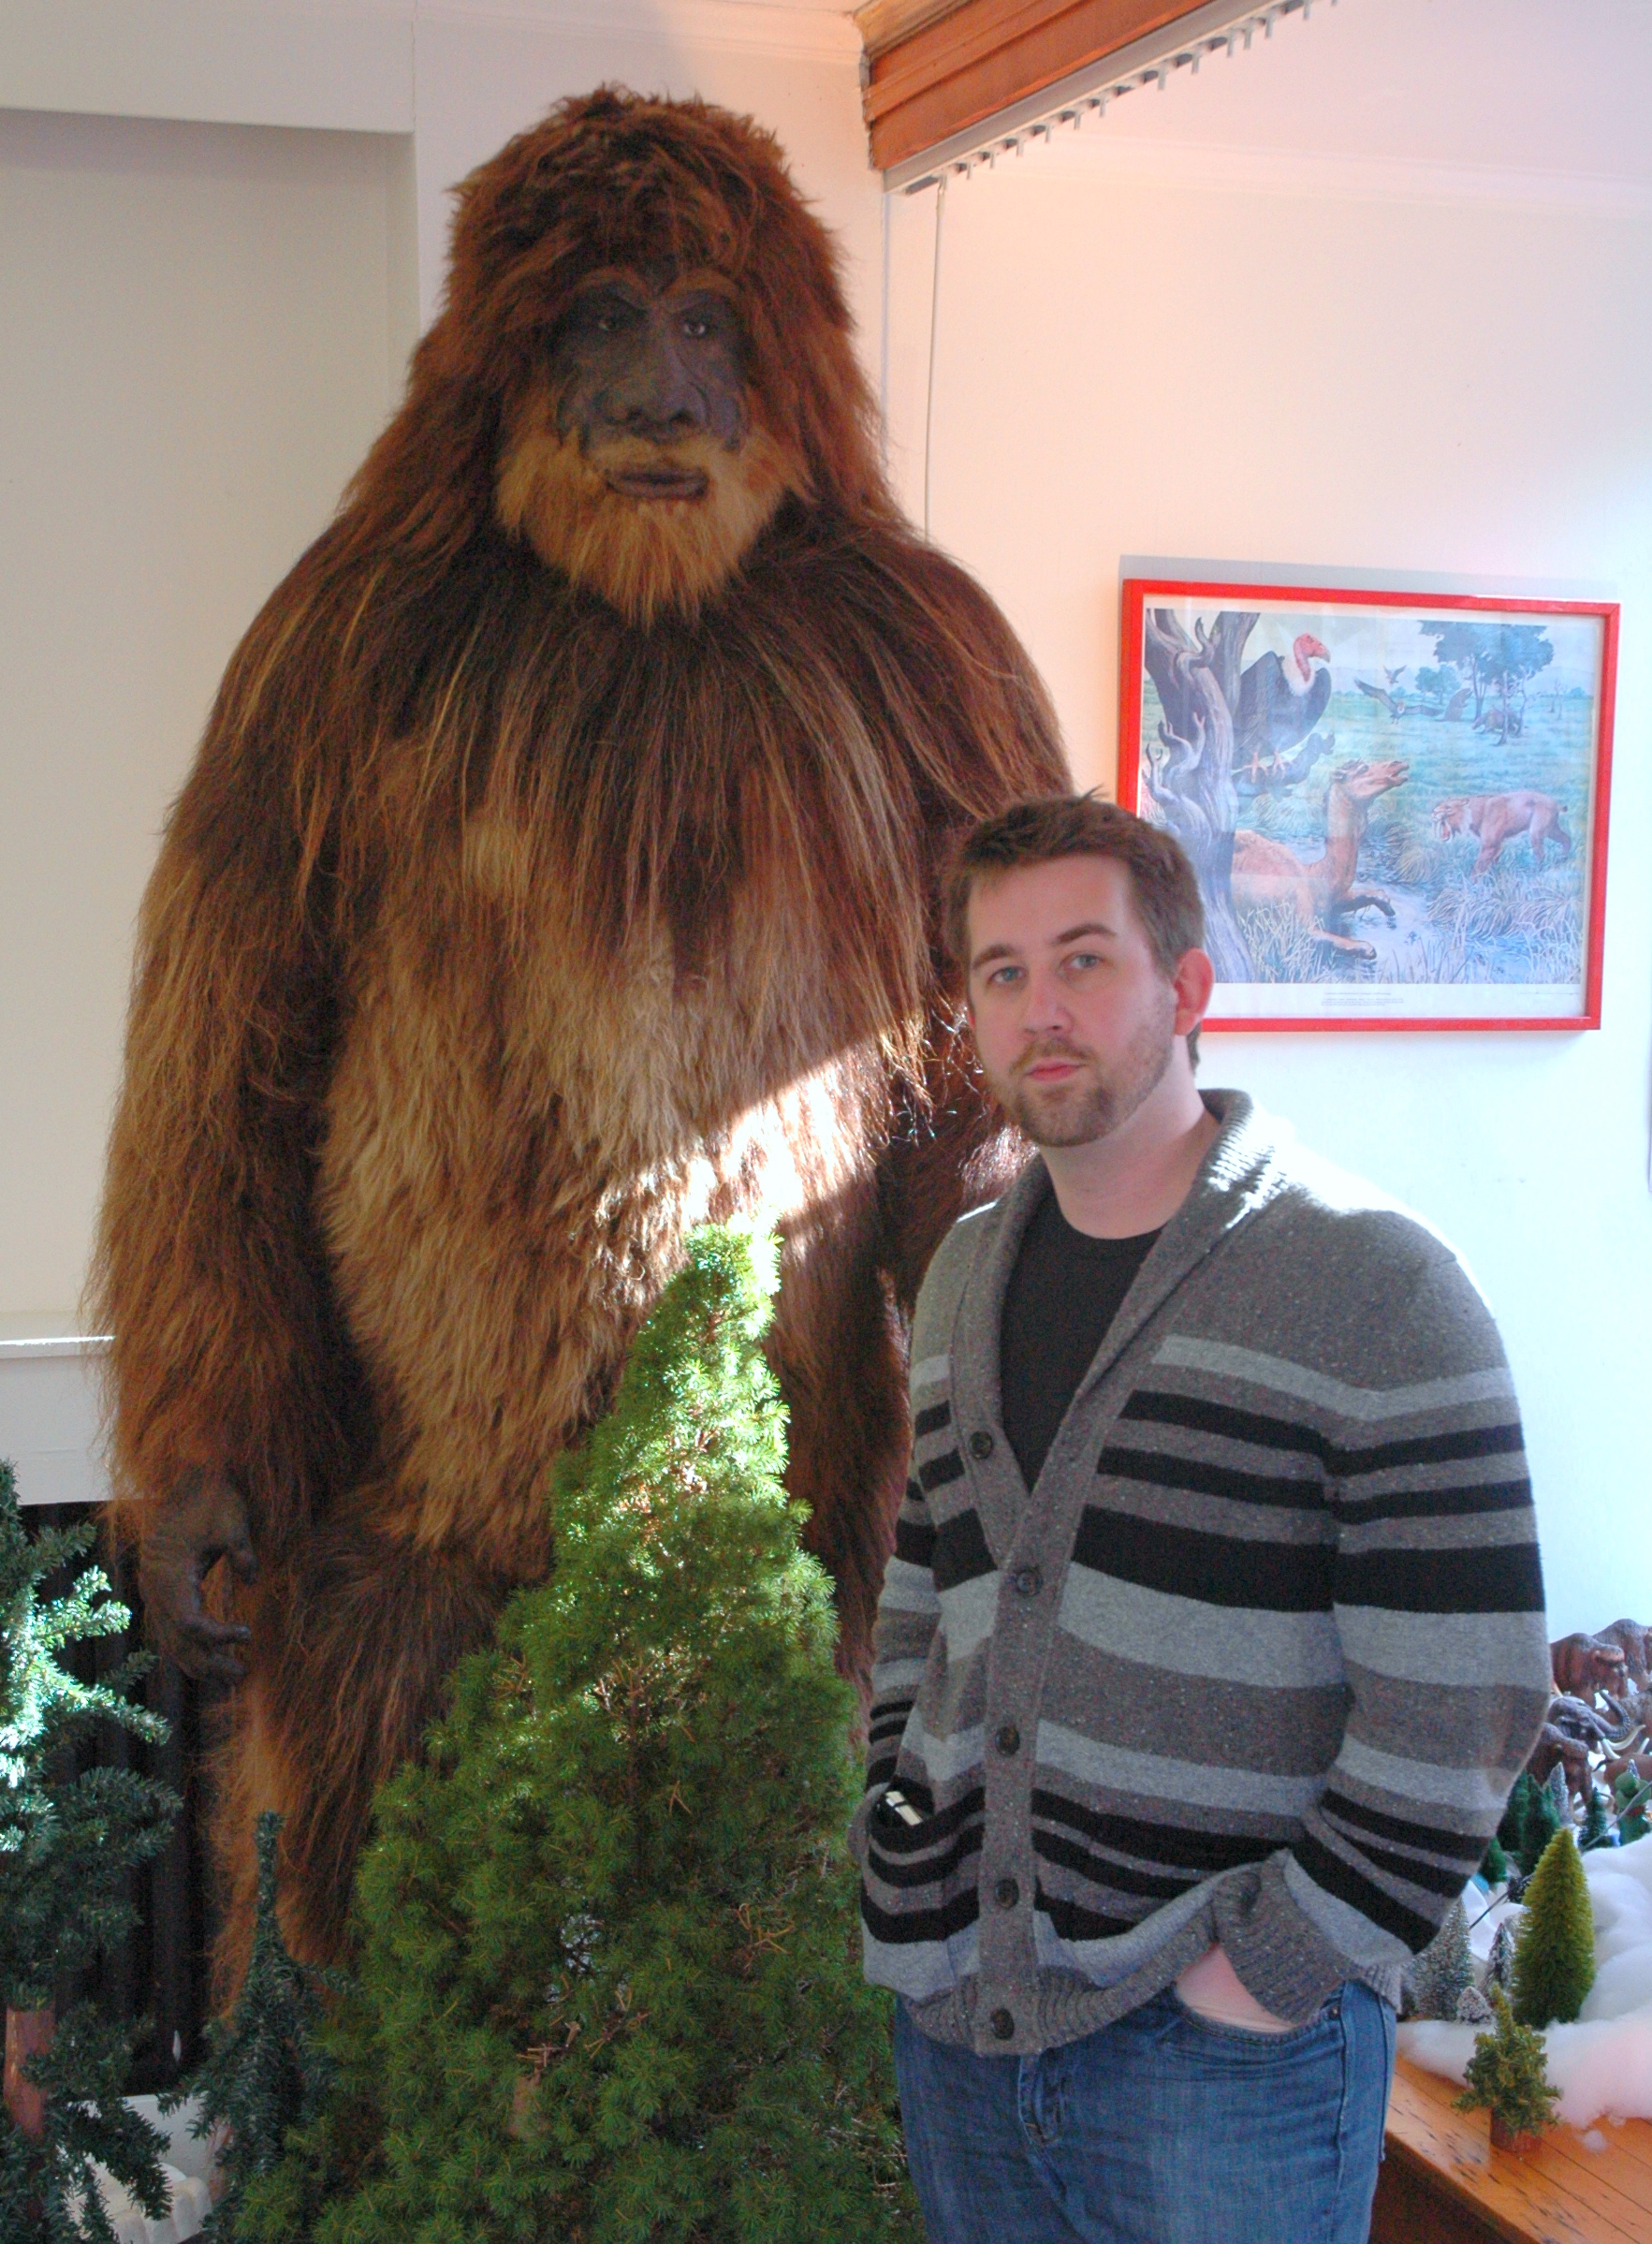 Bigfoot at the International Cryptozoology Museum - Atlas Obscura